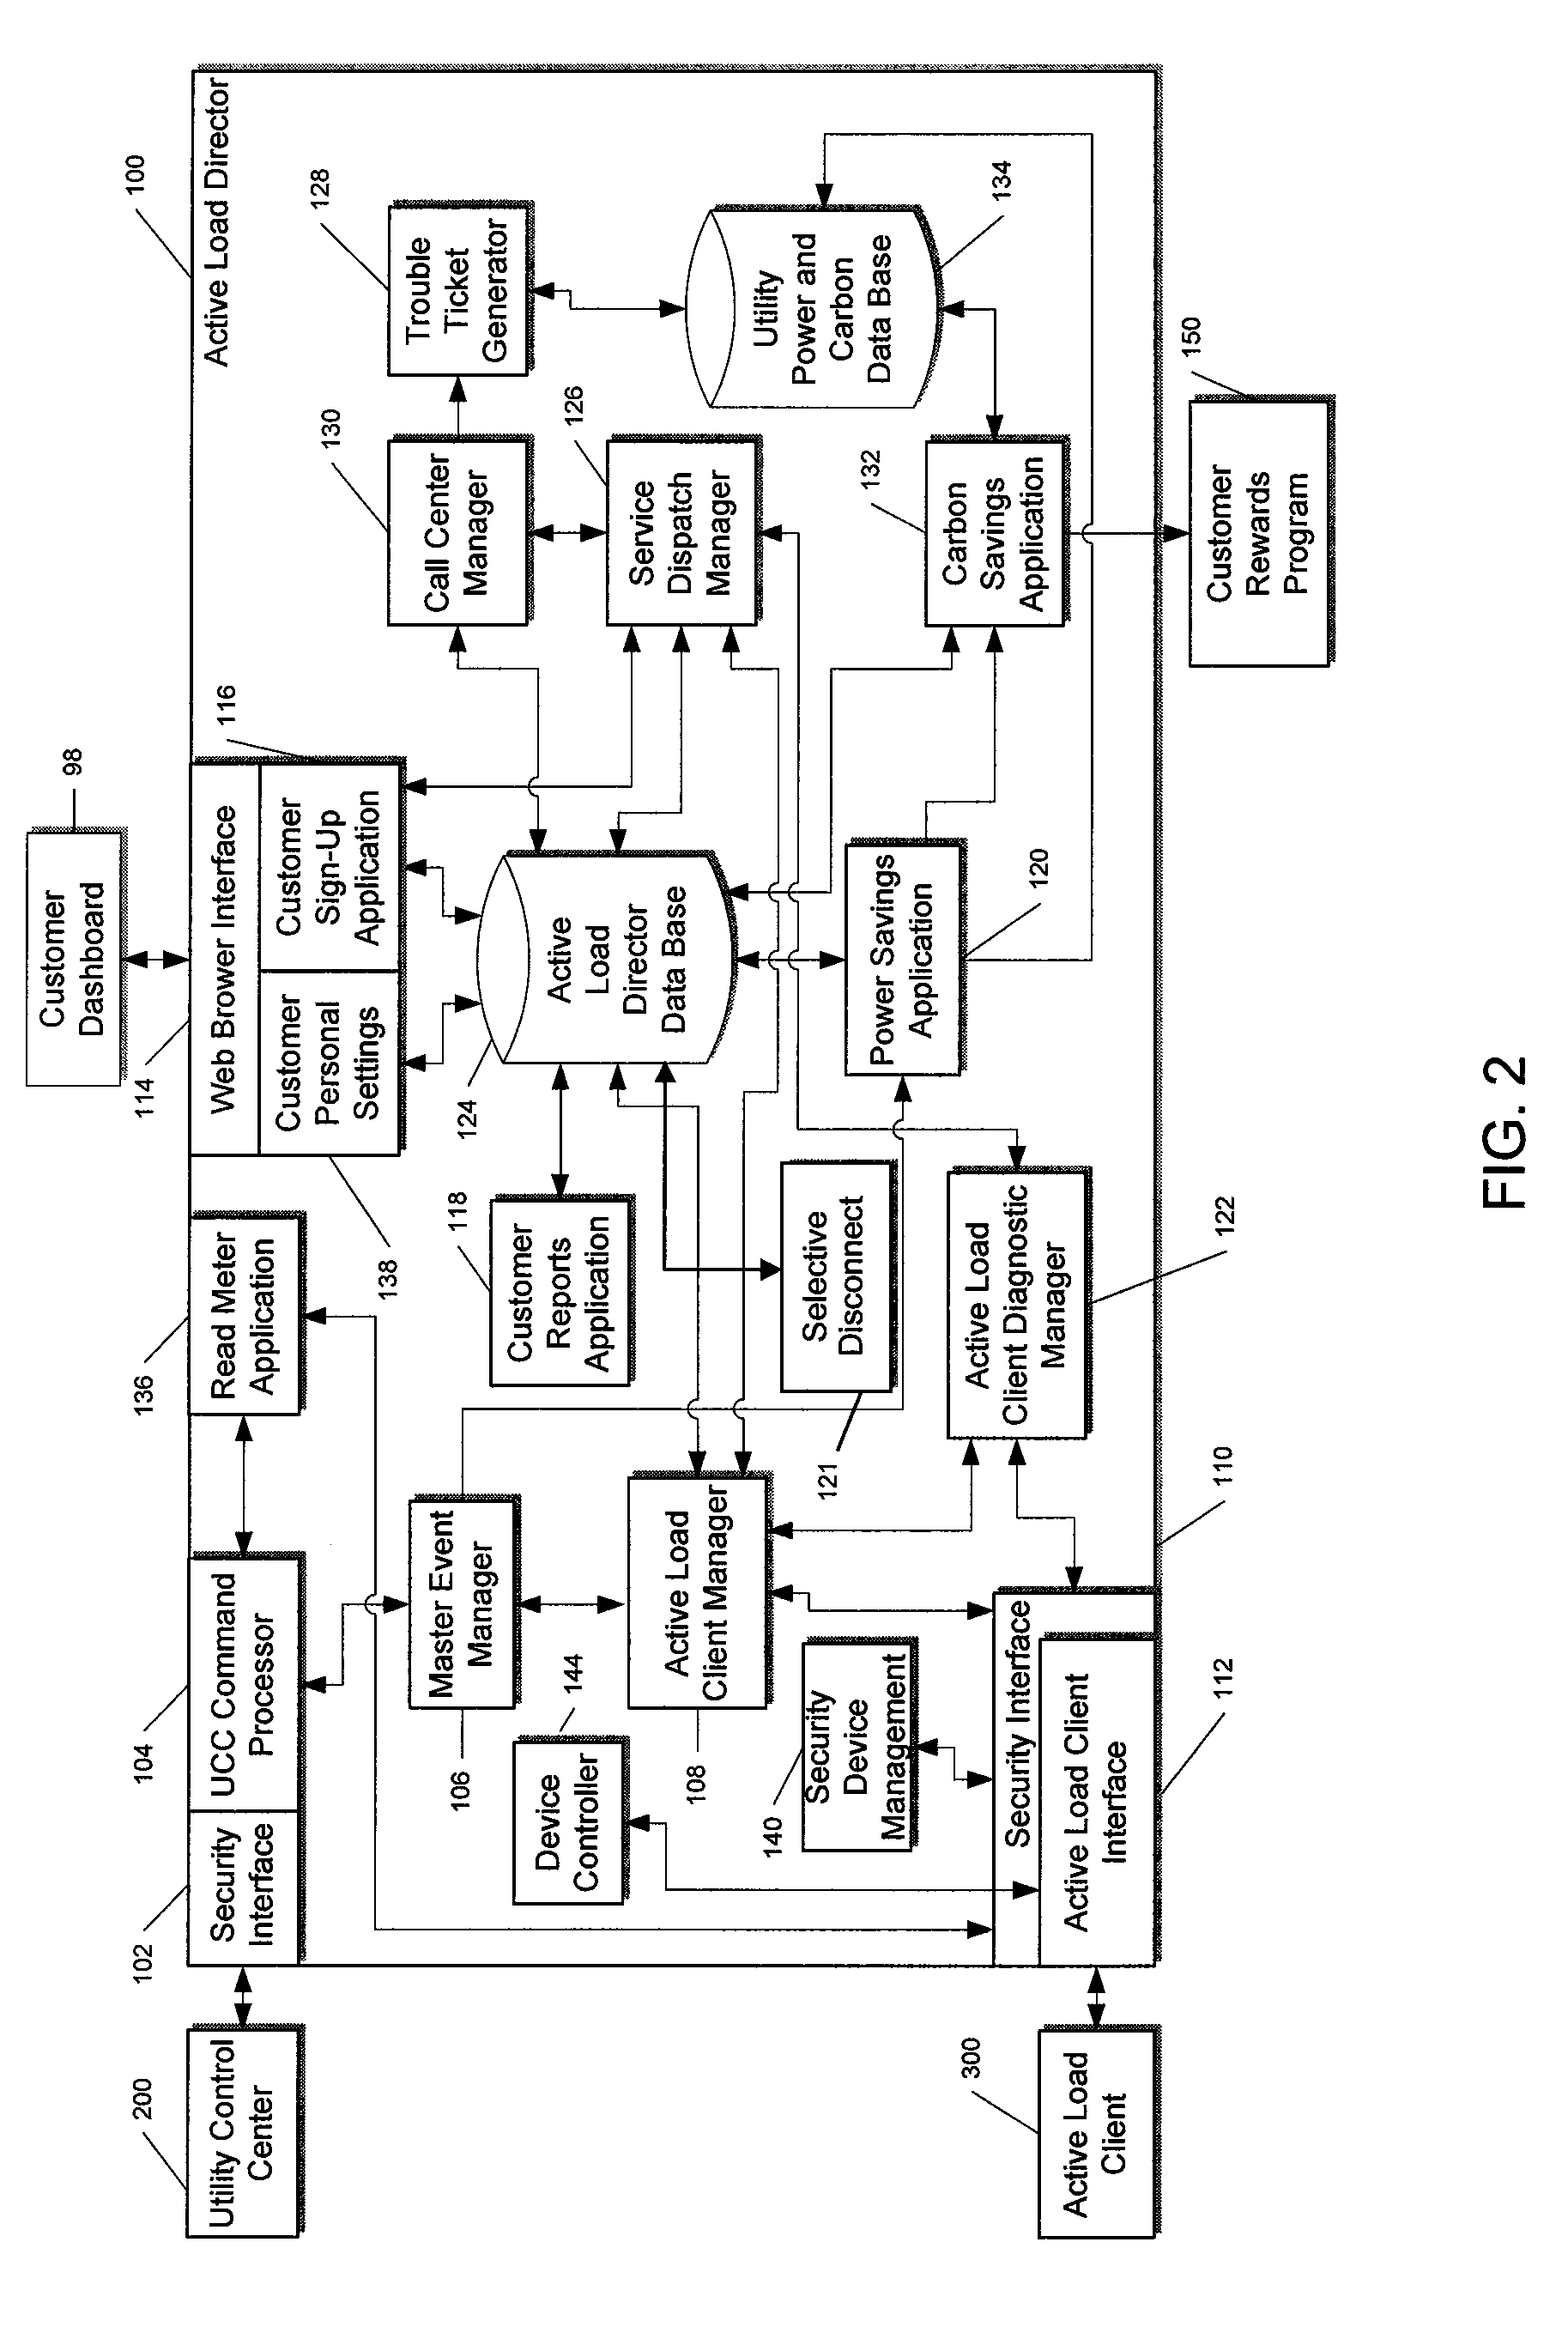 System and method for selective disconnection of electrical service to end customers